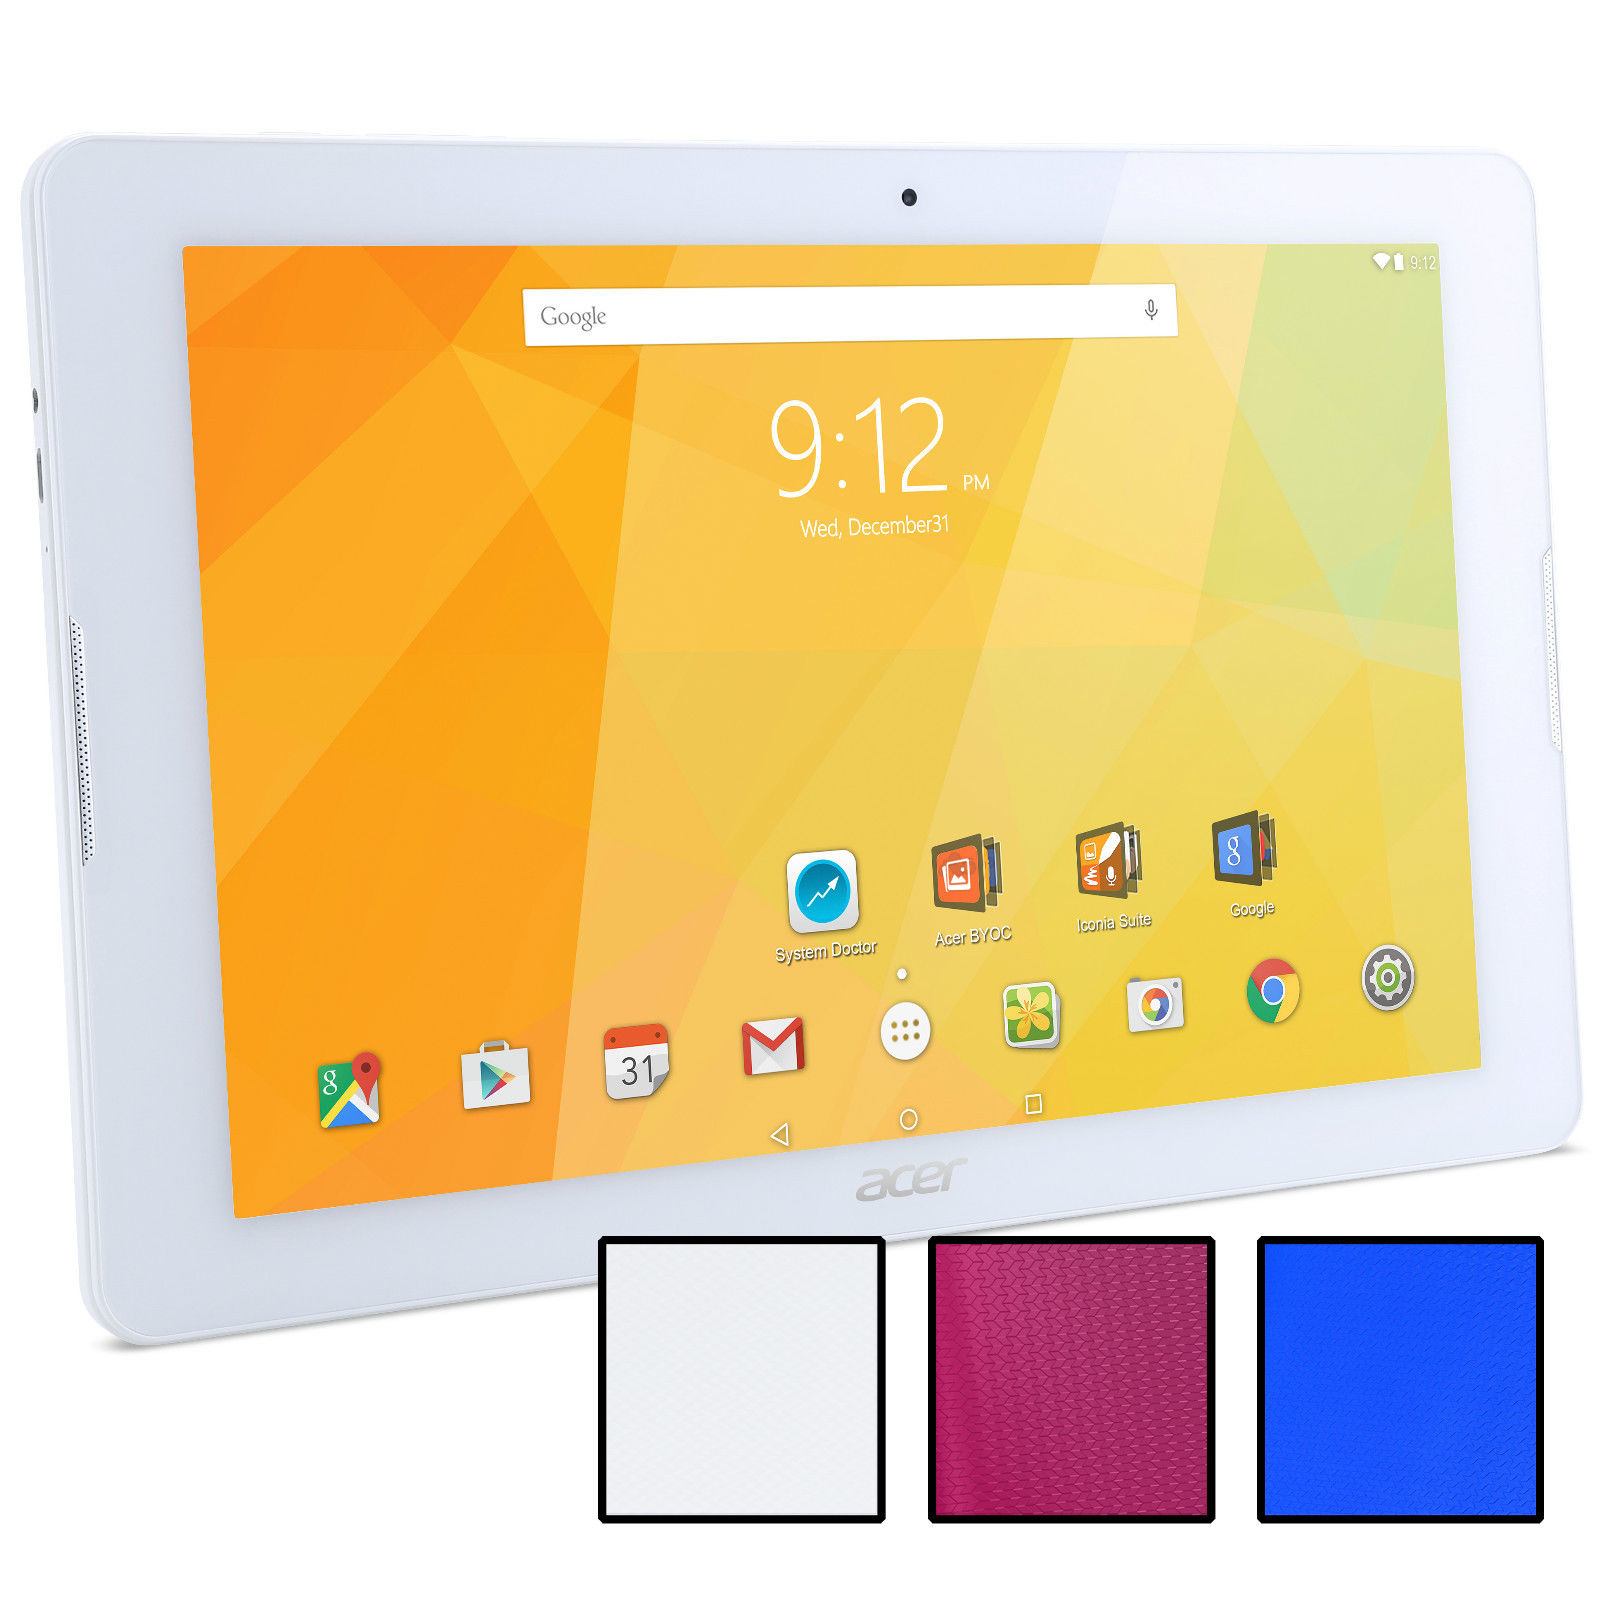 Acer 10 Zoll Tablet Iconia One 10 B3-A20, 32 GB Speicher, Android 5.1